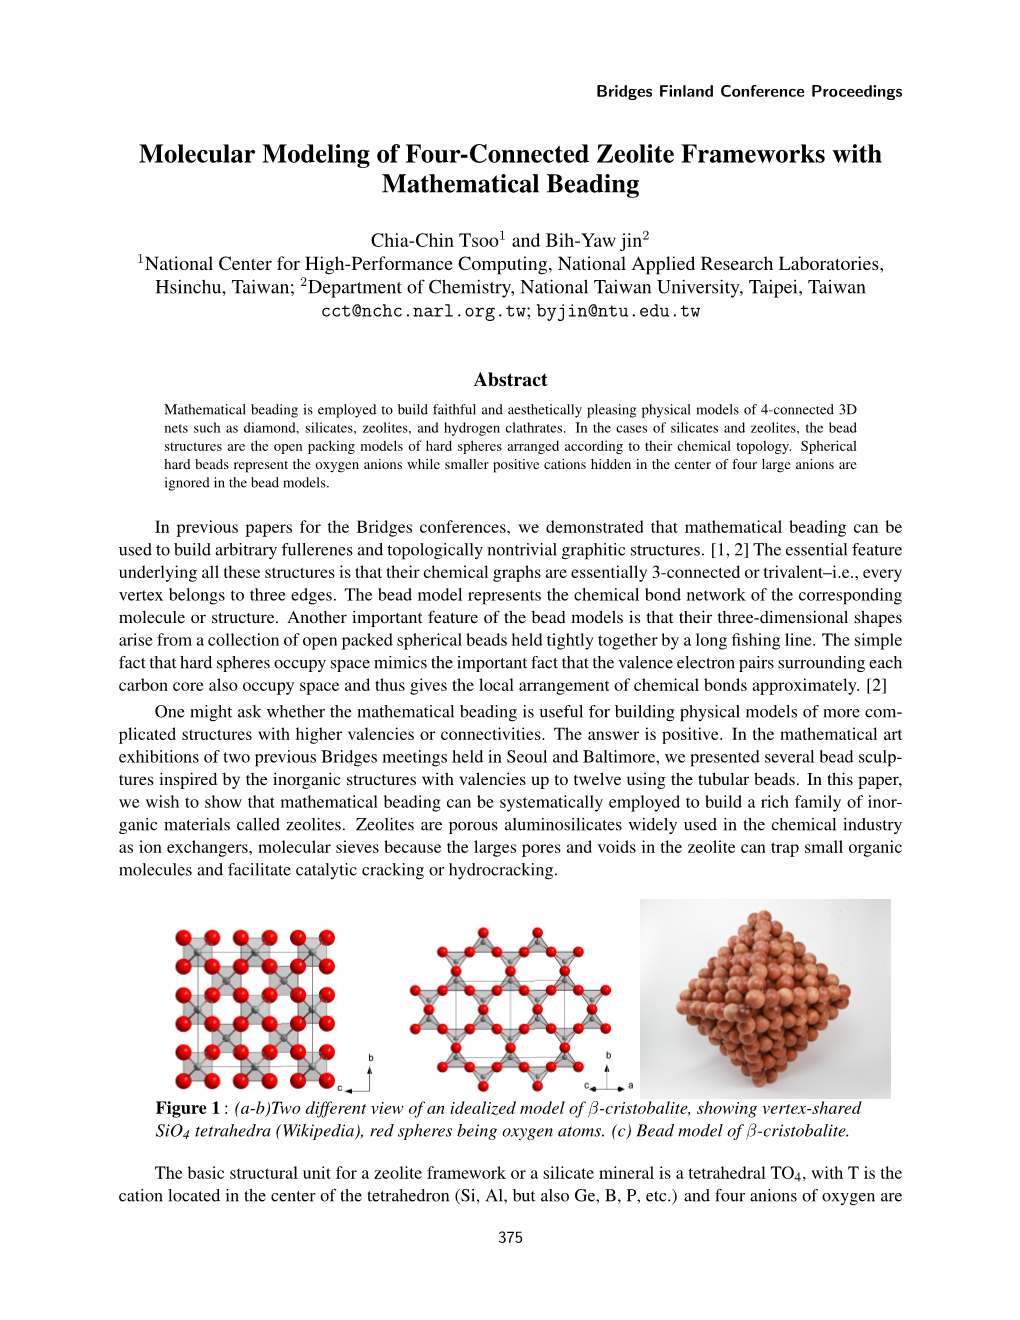 Molecular Modeling of Four-Connected Zeolite Frameworks with Mathematical Beading